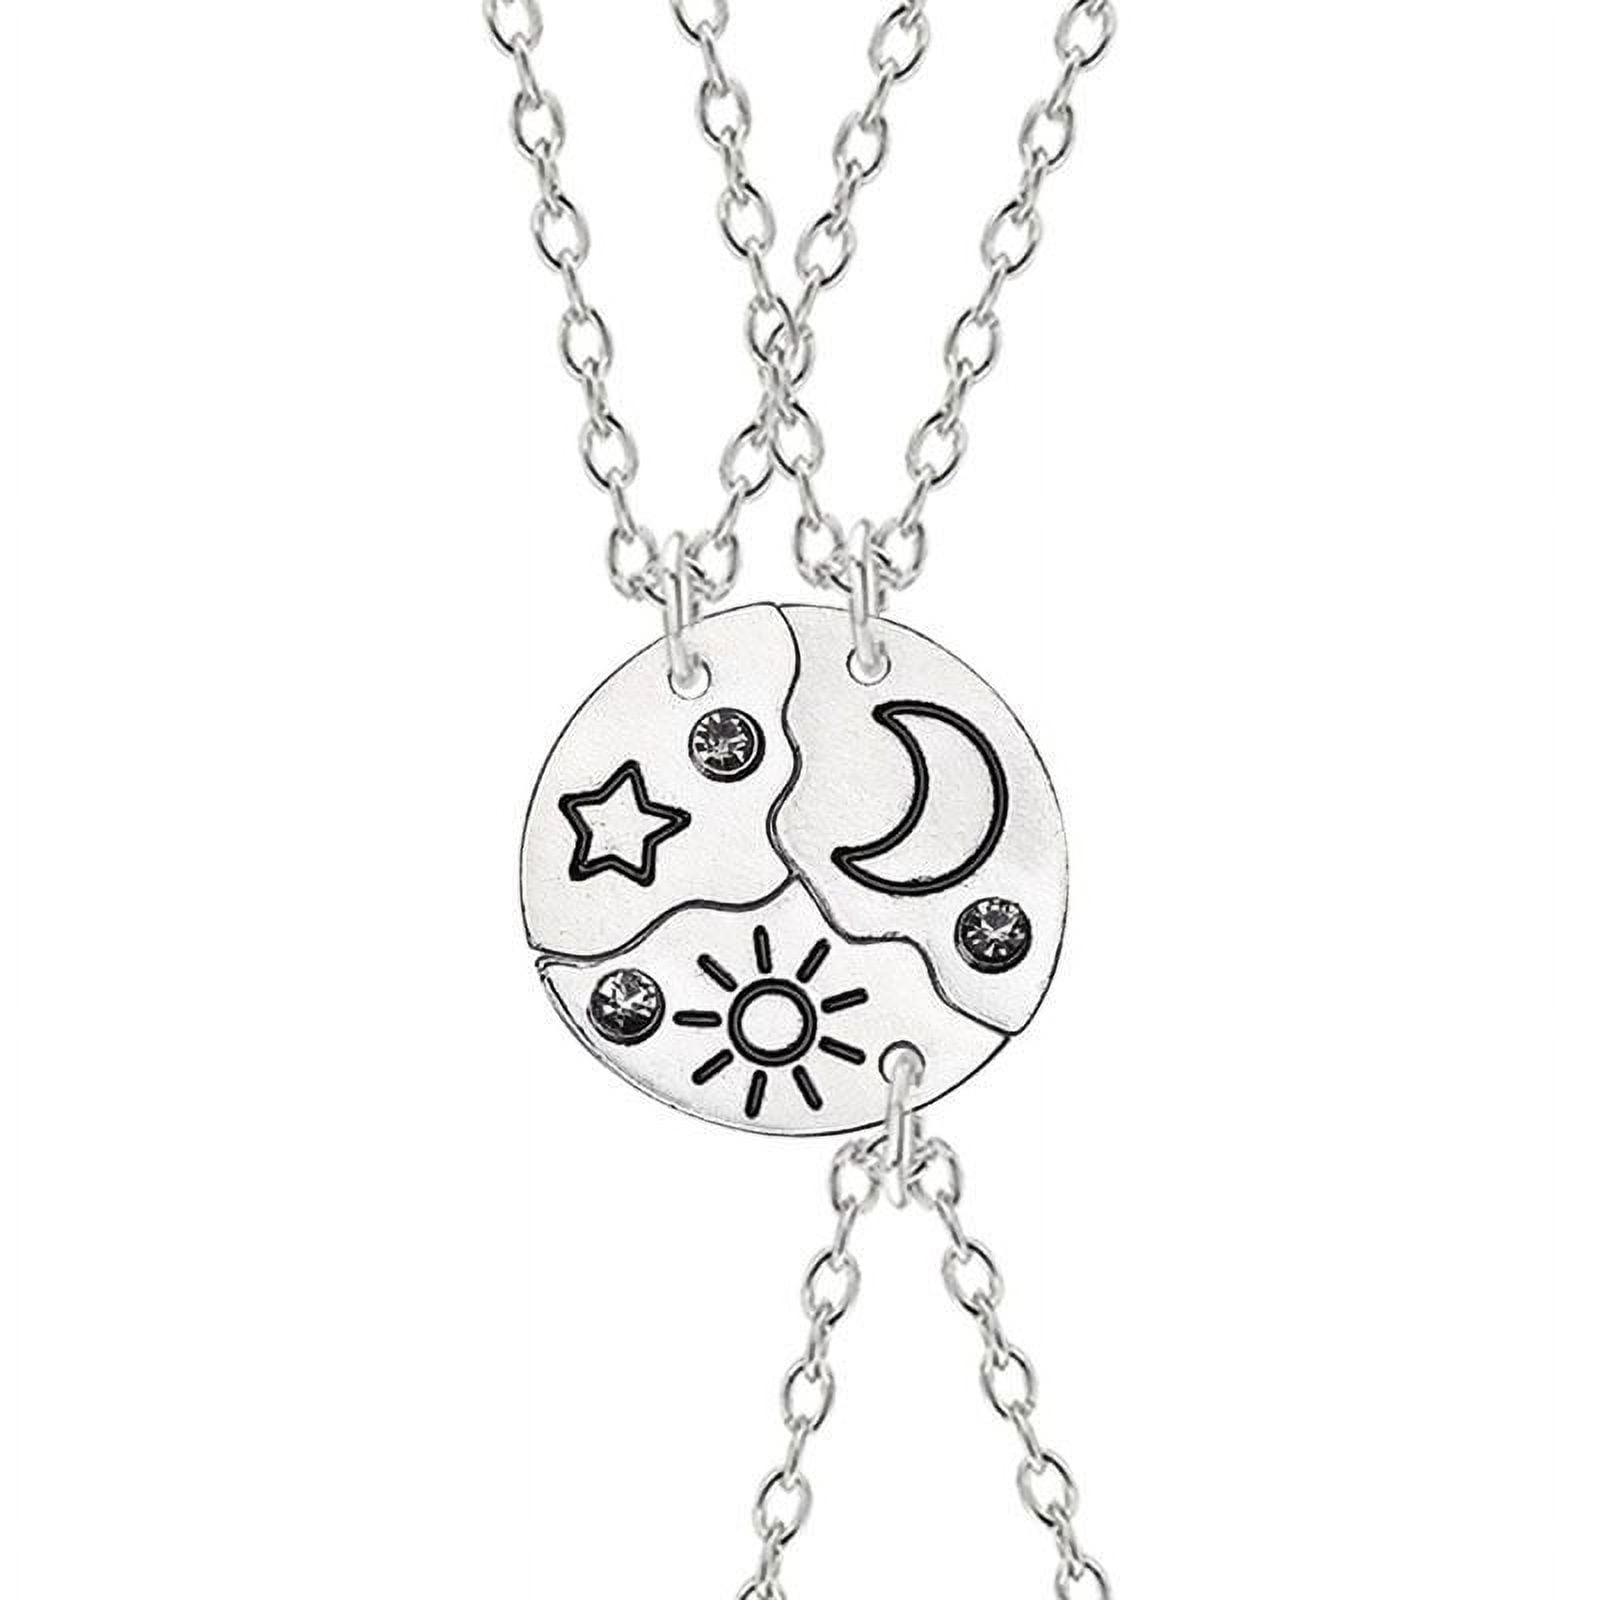 Necklaces for Women Friendship Necklace 2 Friend Necklace Gifts For Girls  Women Friends Distance Birthday Gifts Silver Necklace for Women -  Walmart.com